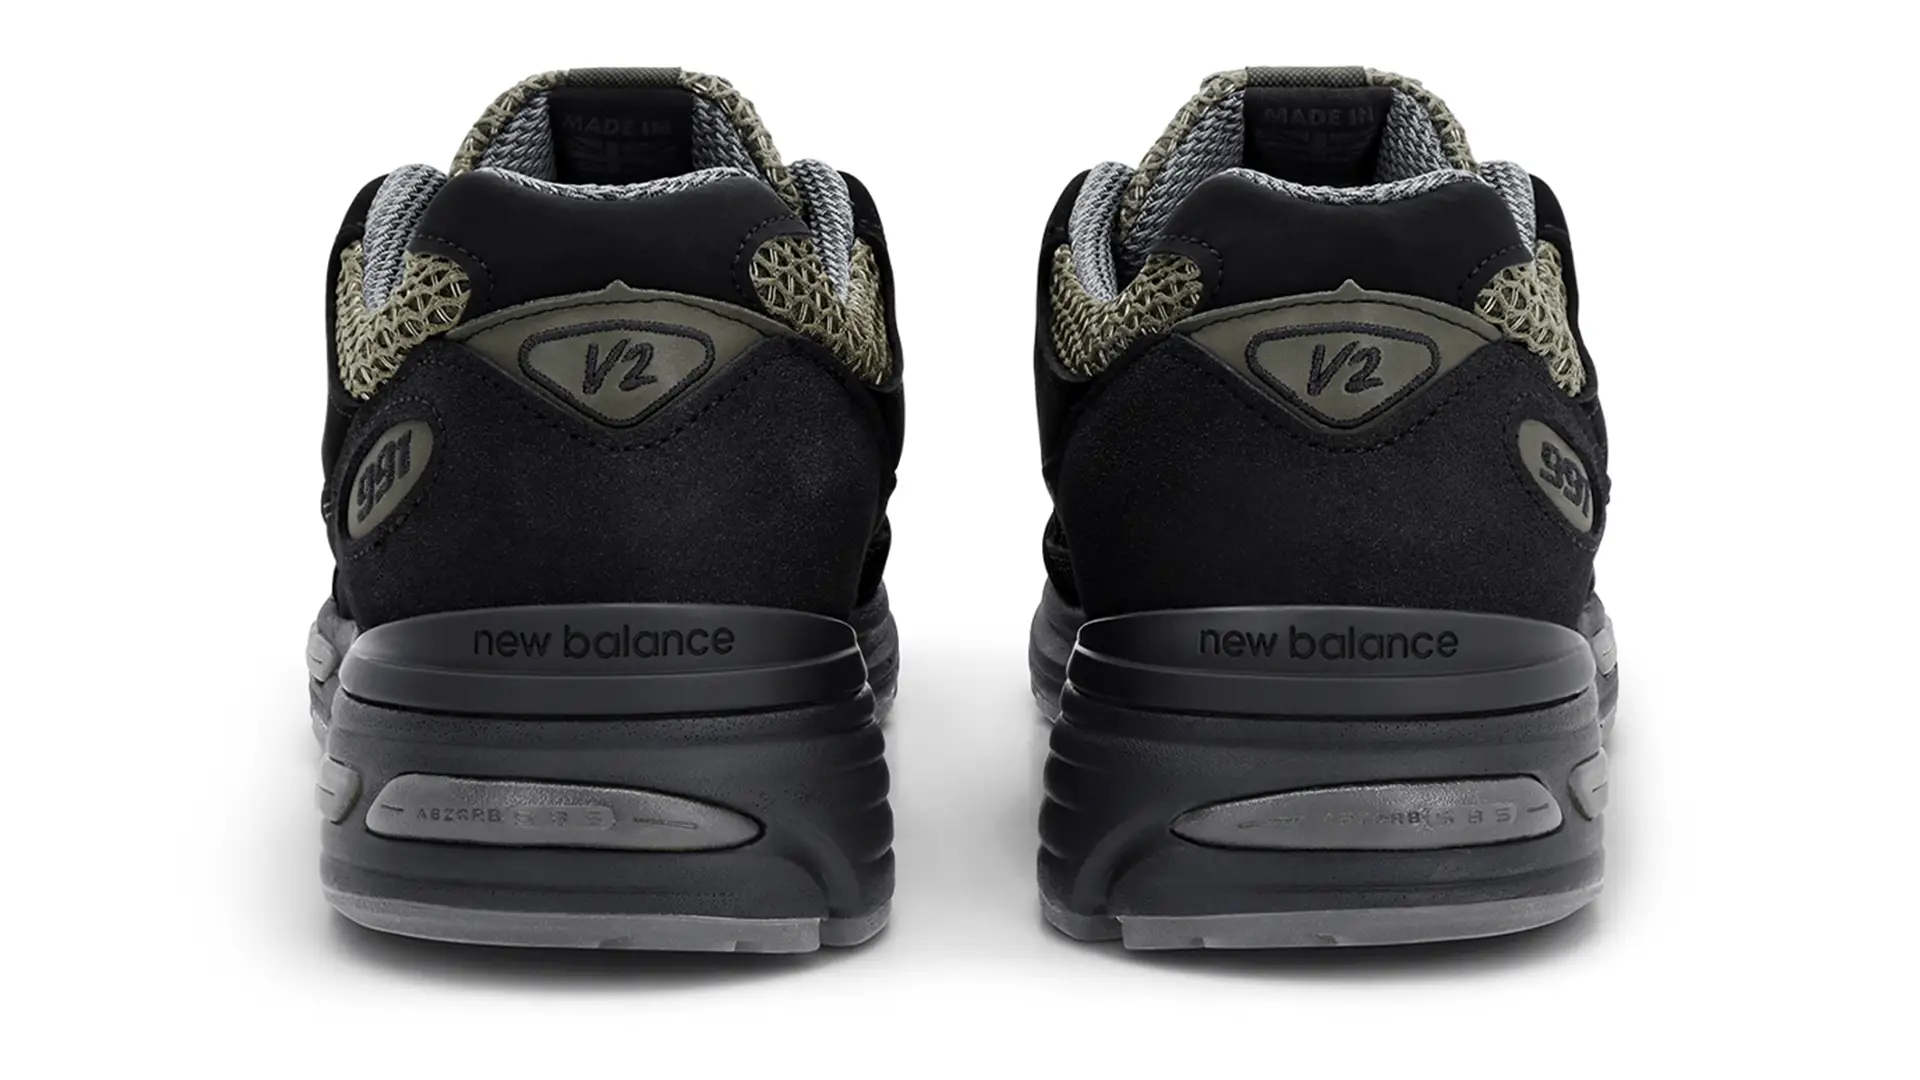 The New Balance x Stone Island 991v2 is Inspired By Industrial 